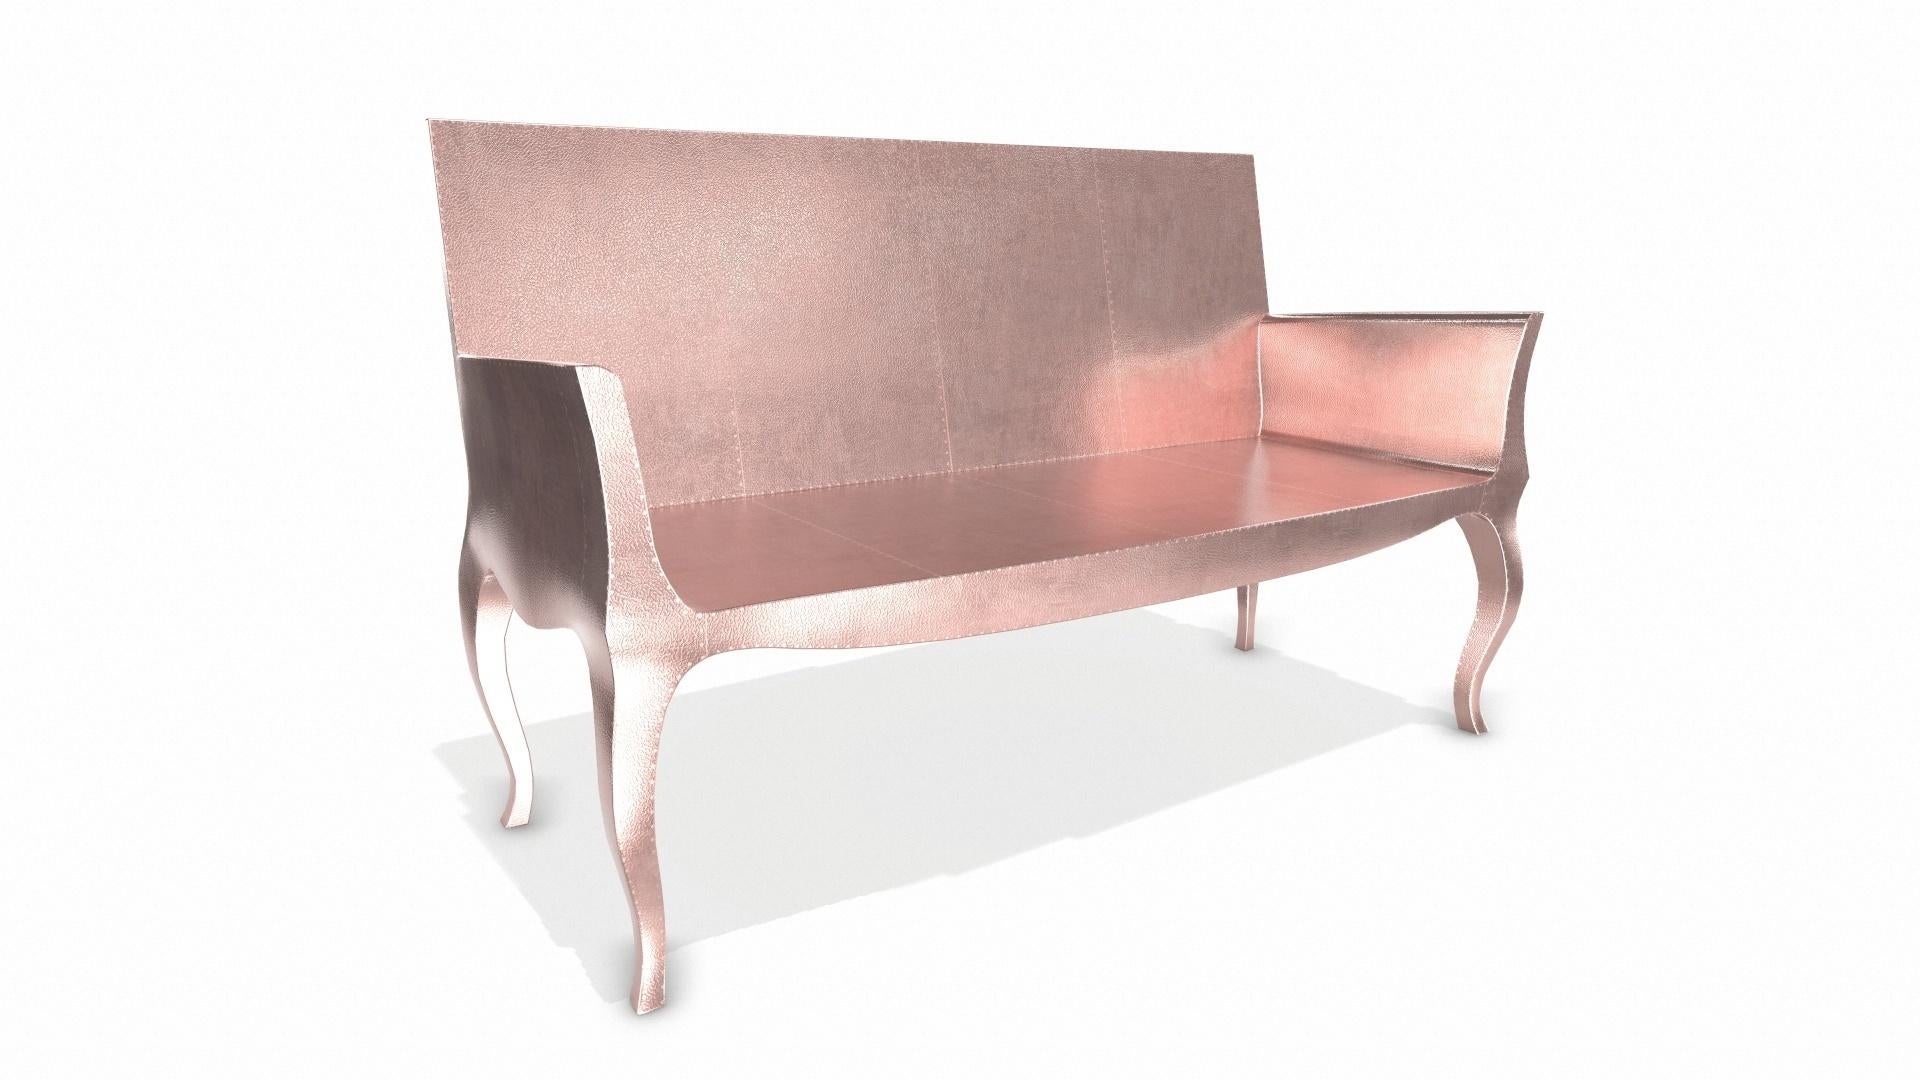 Contemporary Louise Settee Art Deco Lounge Chairs in Fine Hammered Copper by Paul Mathieu For Sale